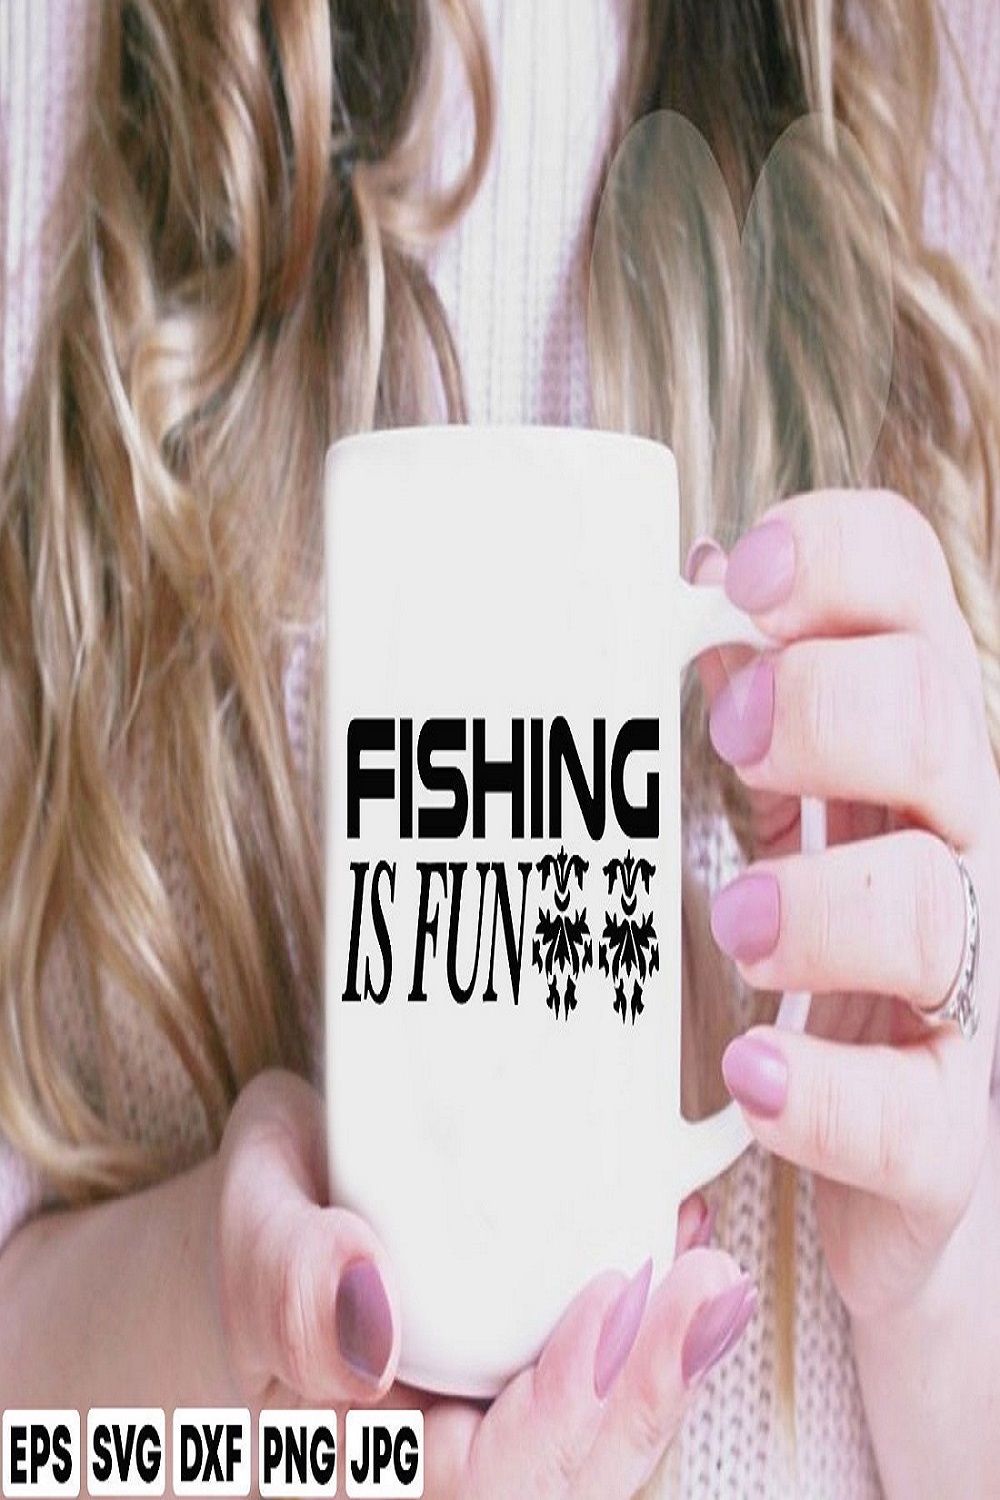 Fishing is fun pinterest preview image.